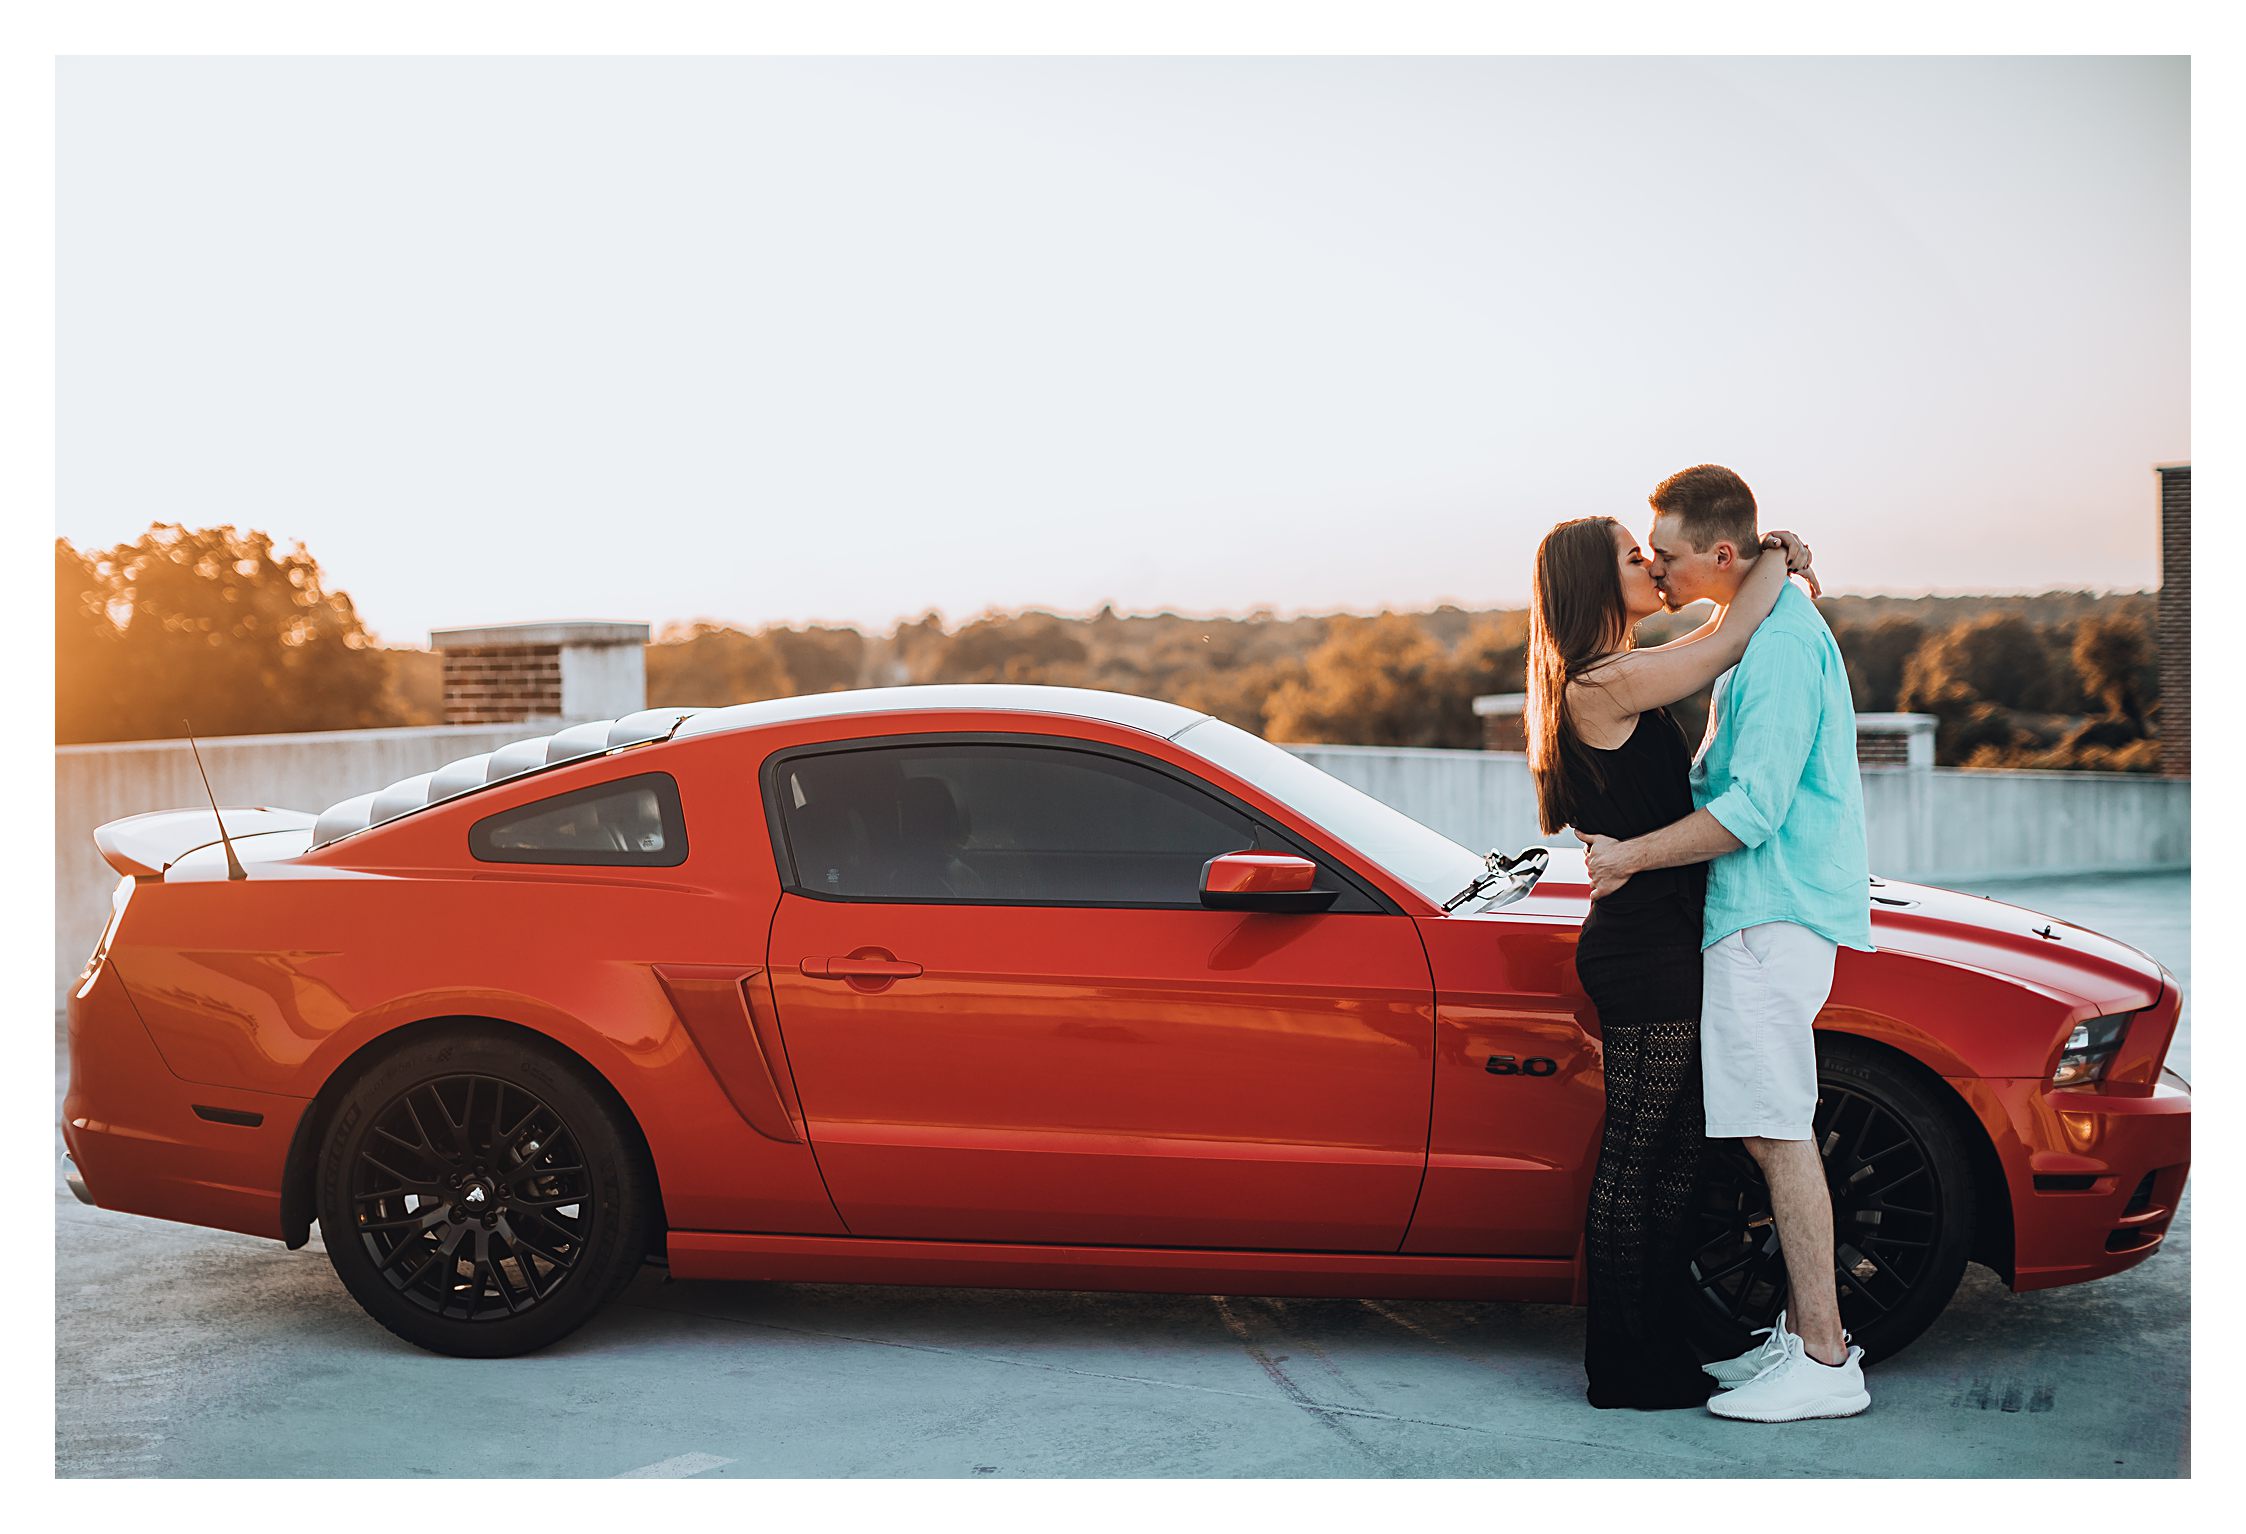 Kissing by mustang 5.0 GT